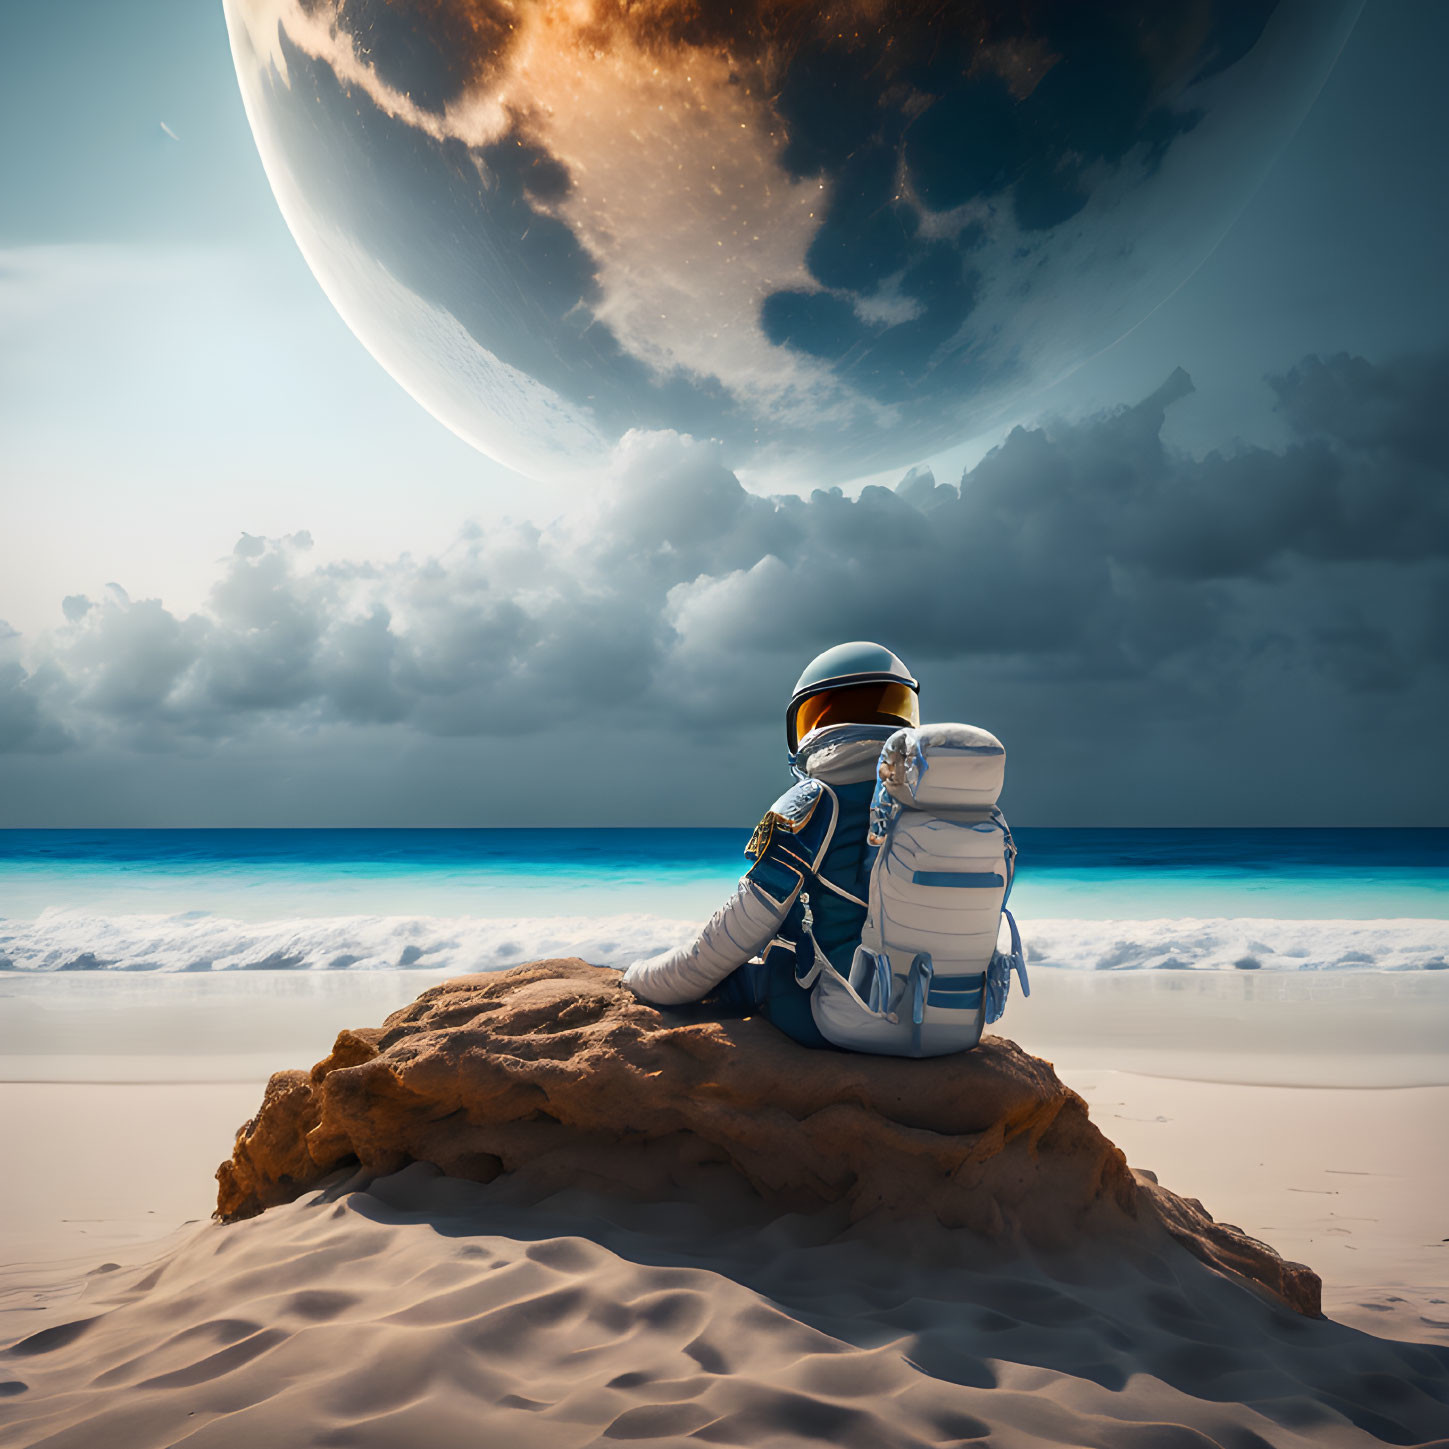 Astronaut on sandy beach gazes at large planet in sky